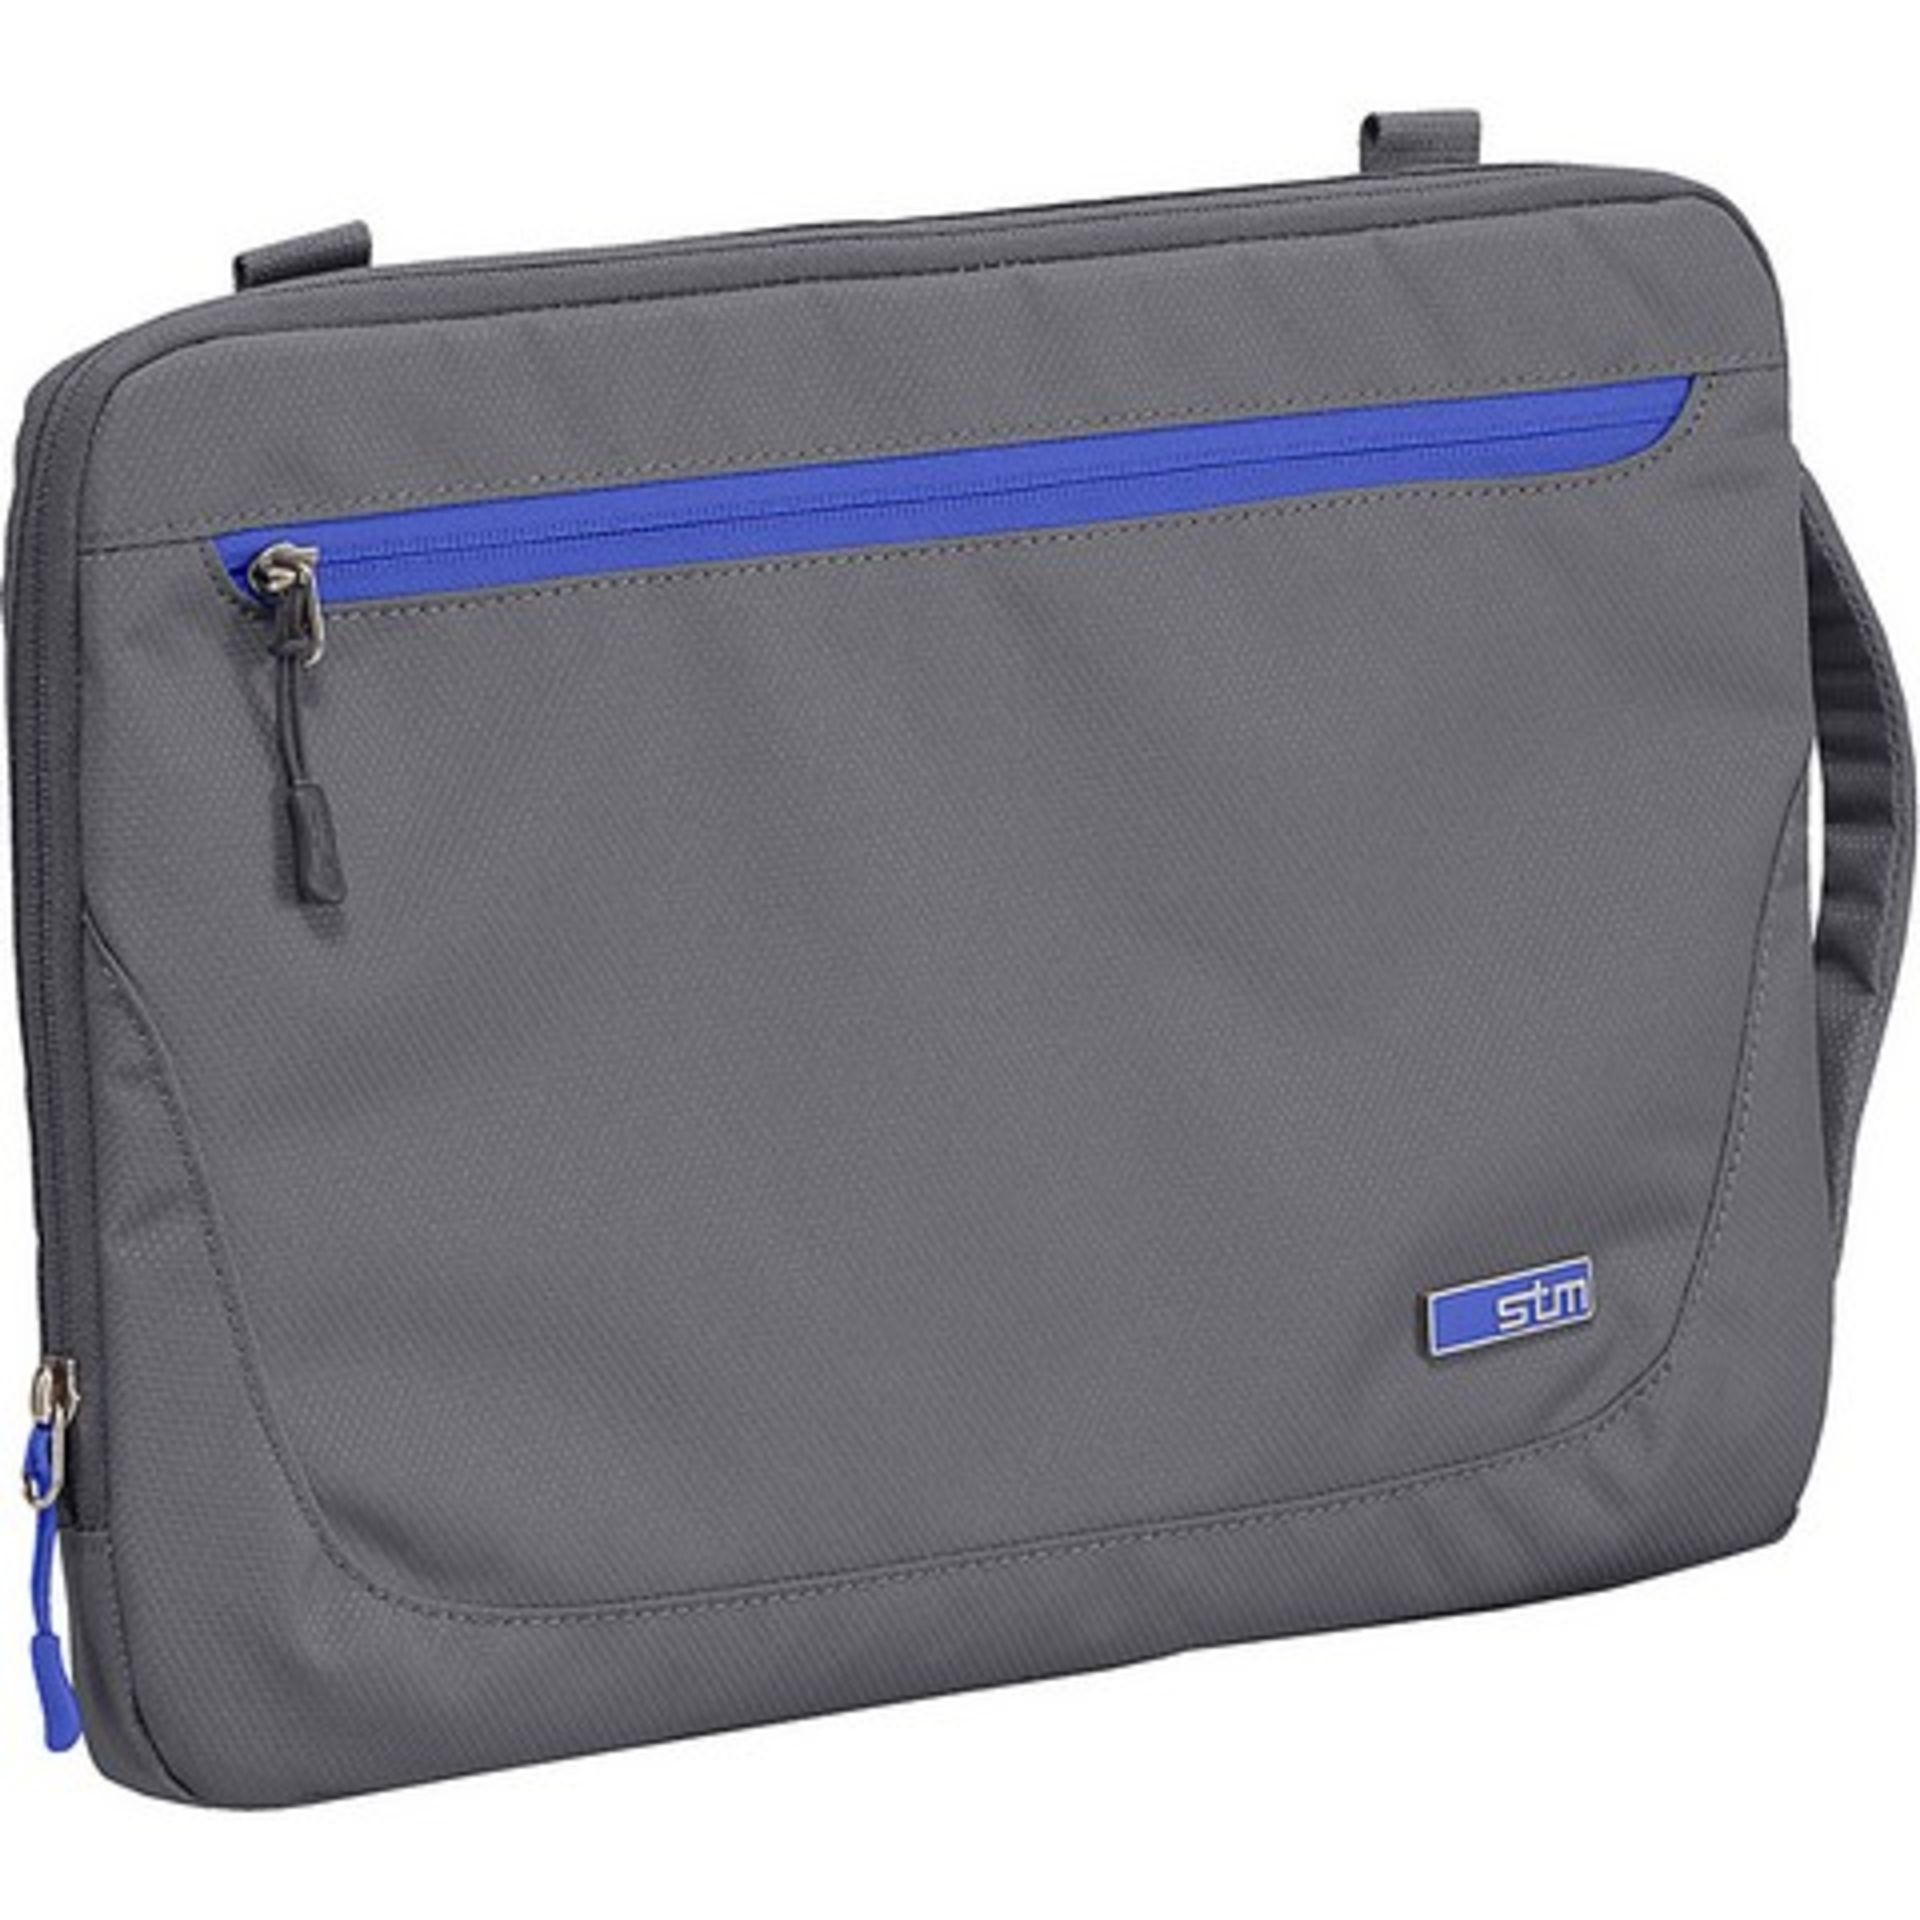 V Brand New STM Blazer Padded Sleeve Bag For Laptops And Tablets 11" Charcoal With Removable - Image 2 of 2